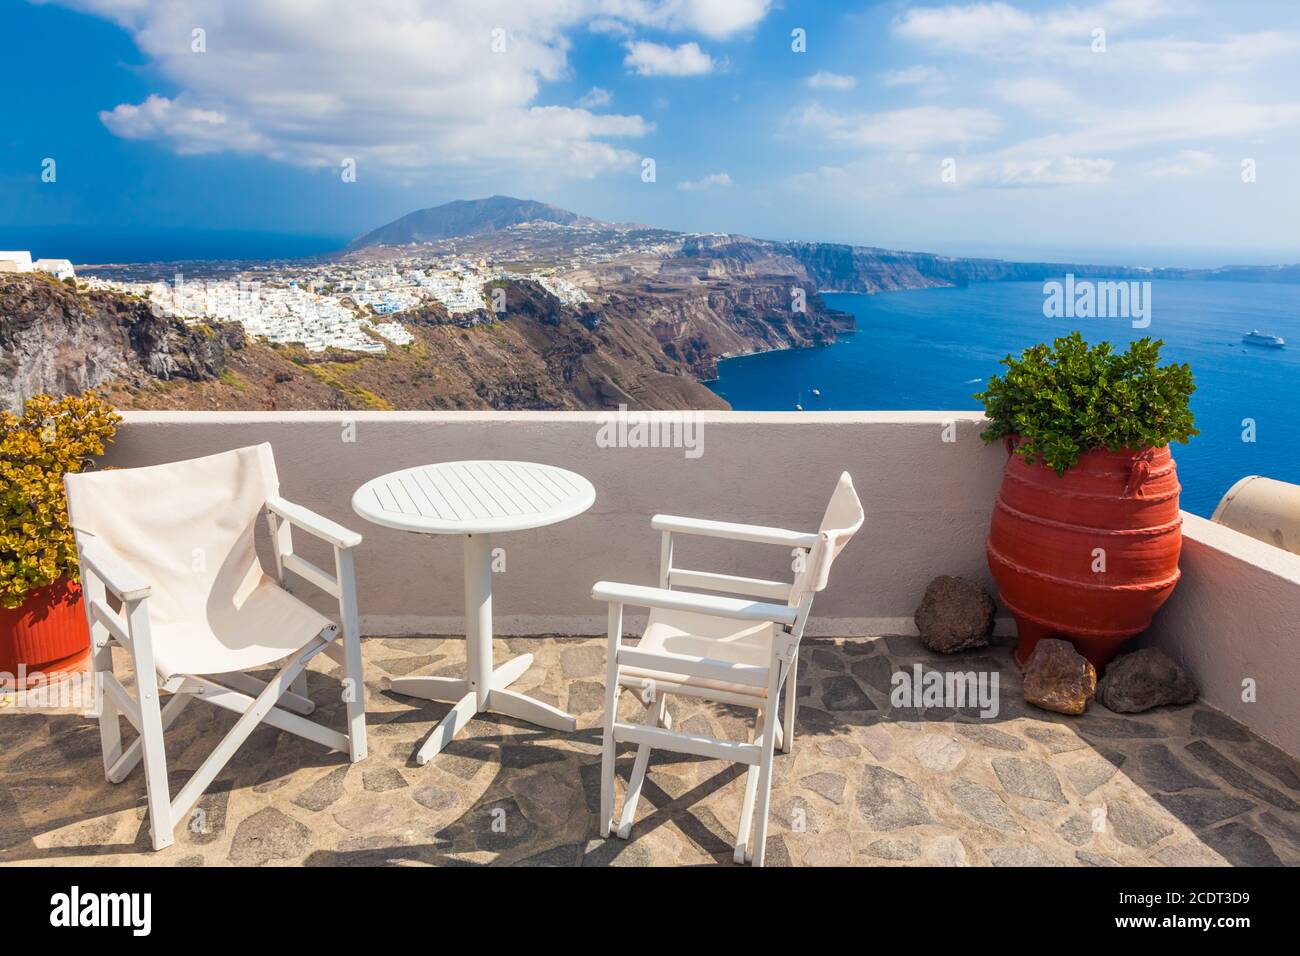 Table and chairs on roof with a panorama view on Santorini island, Greece. Stock Photo